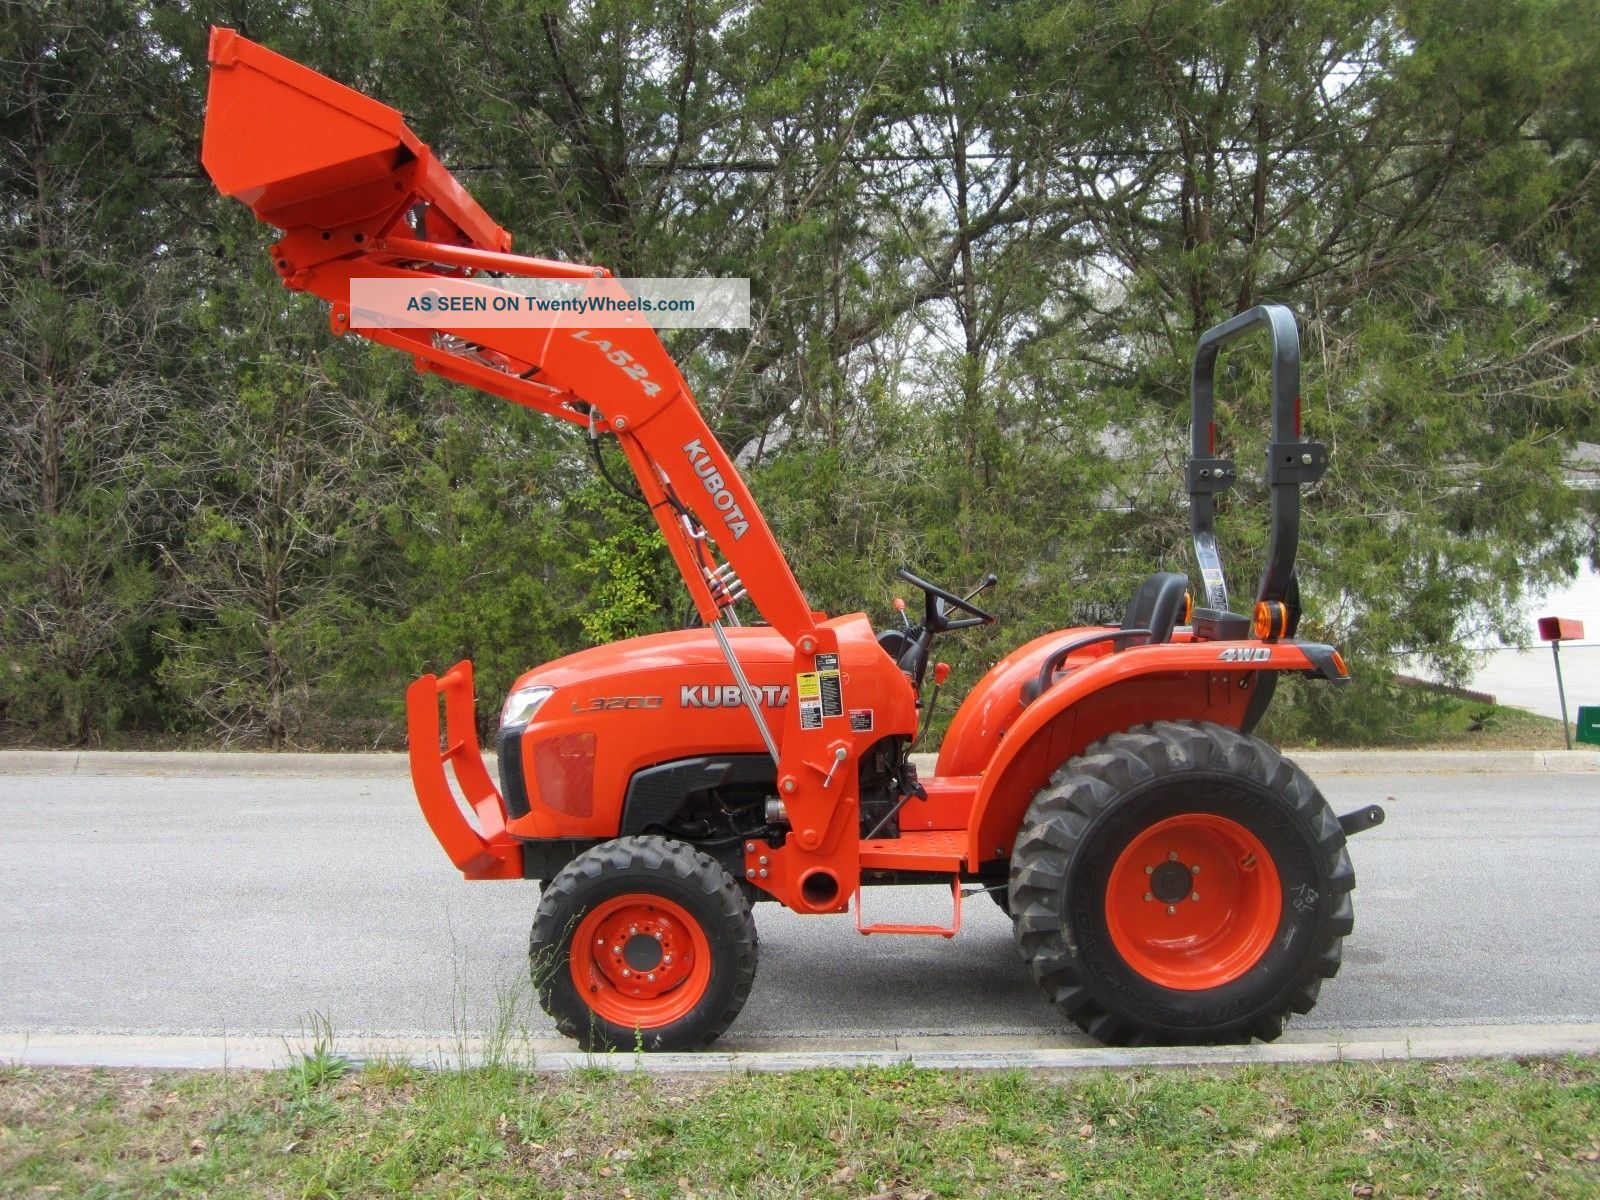 2013 Kubota L3200 4x4 Compact Tractor Only 15hrs. With An La524 Loader ...